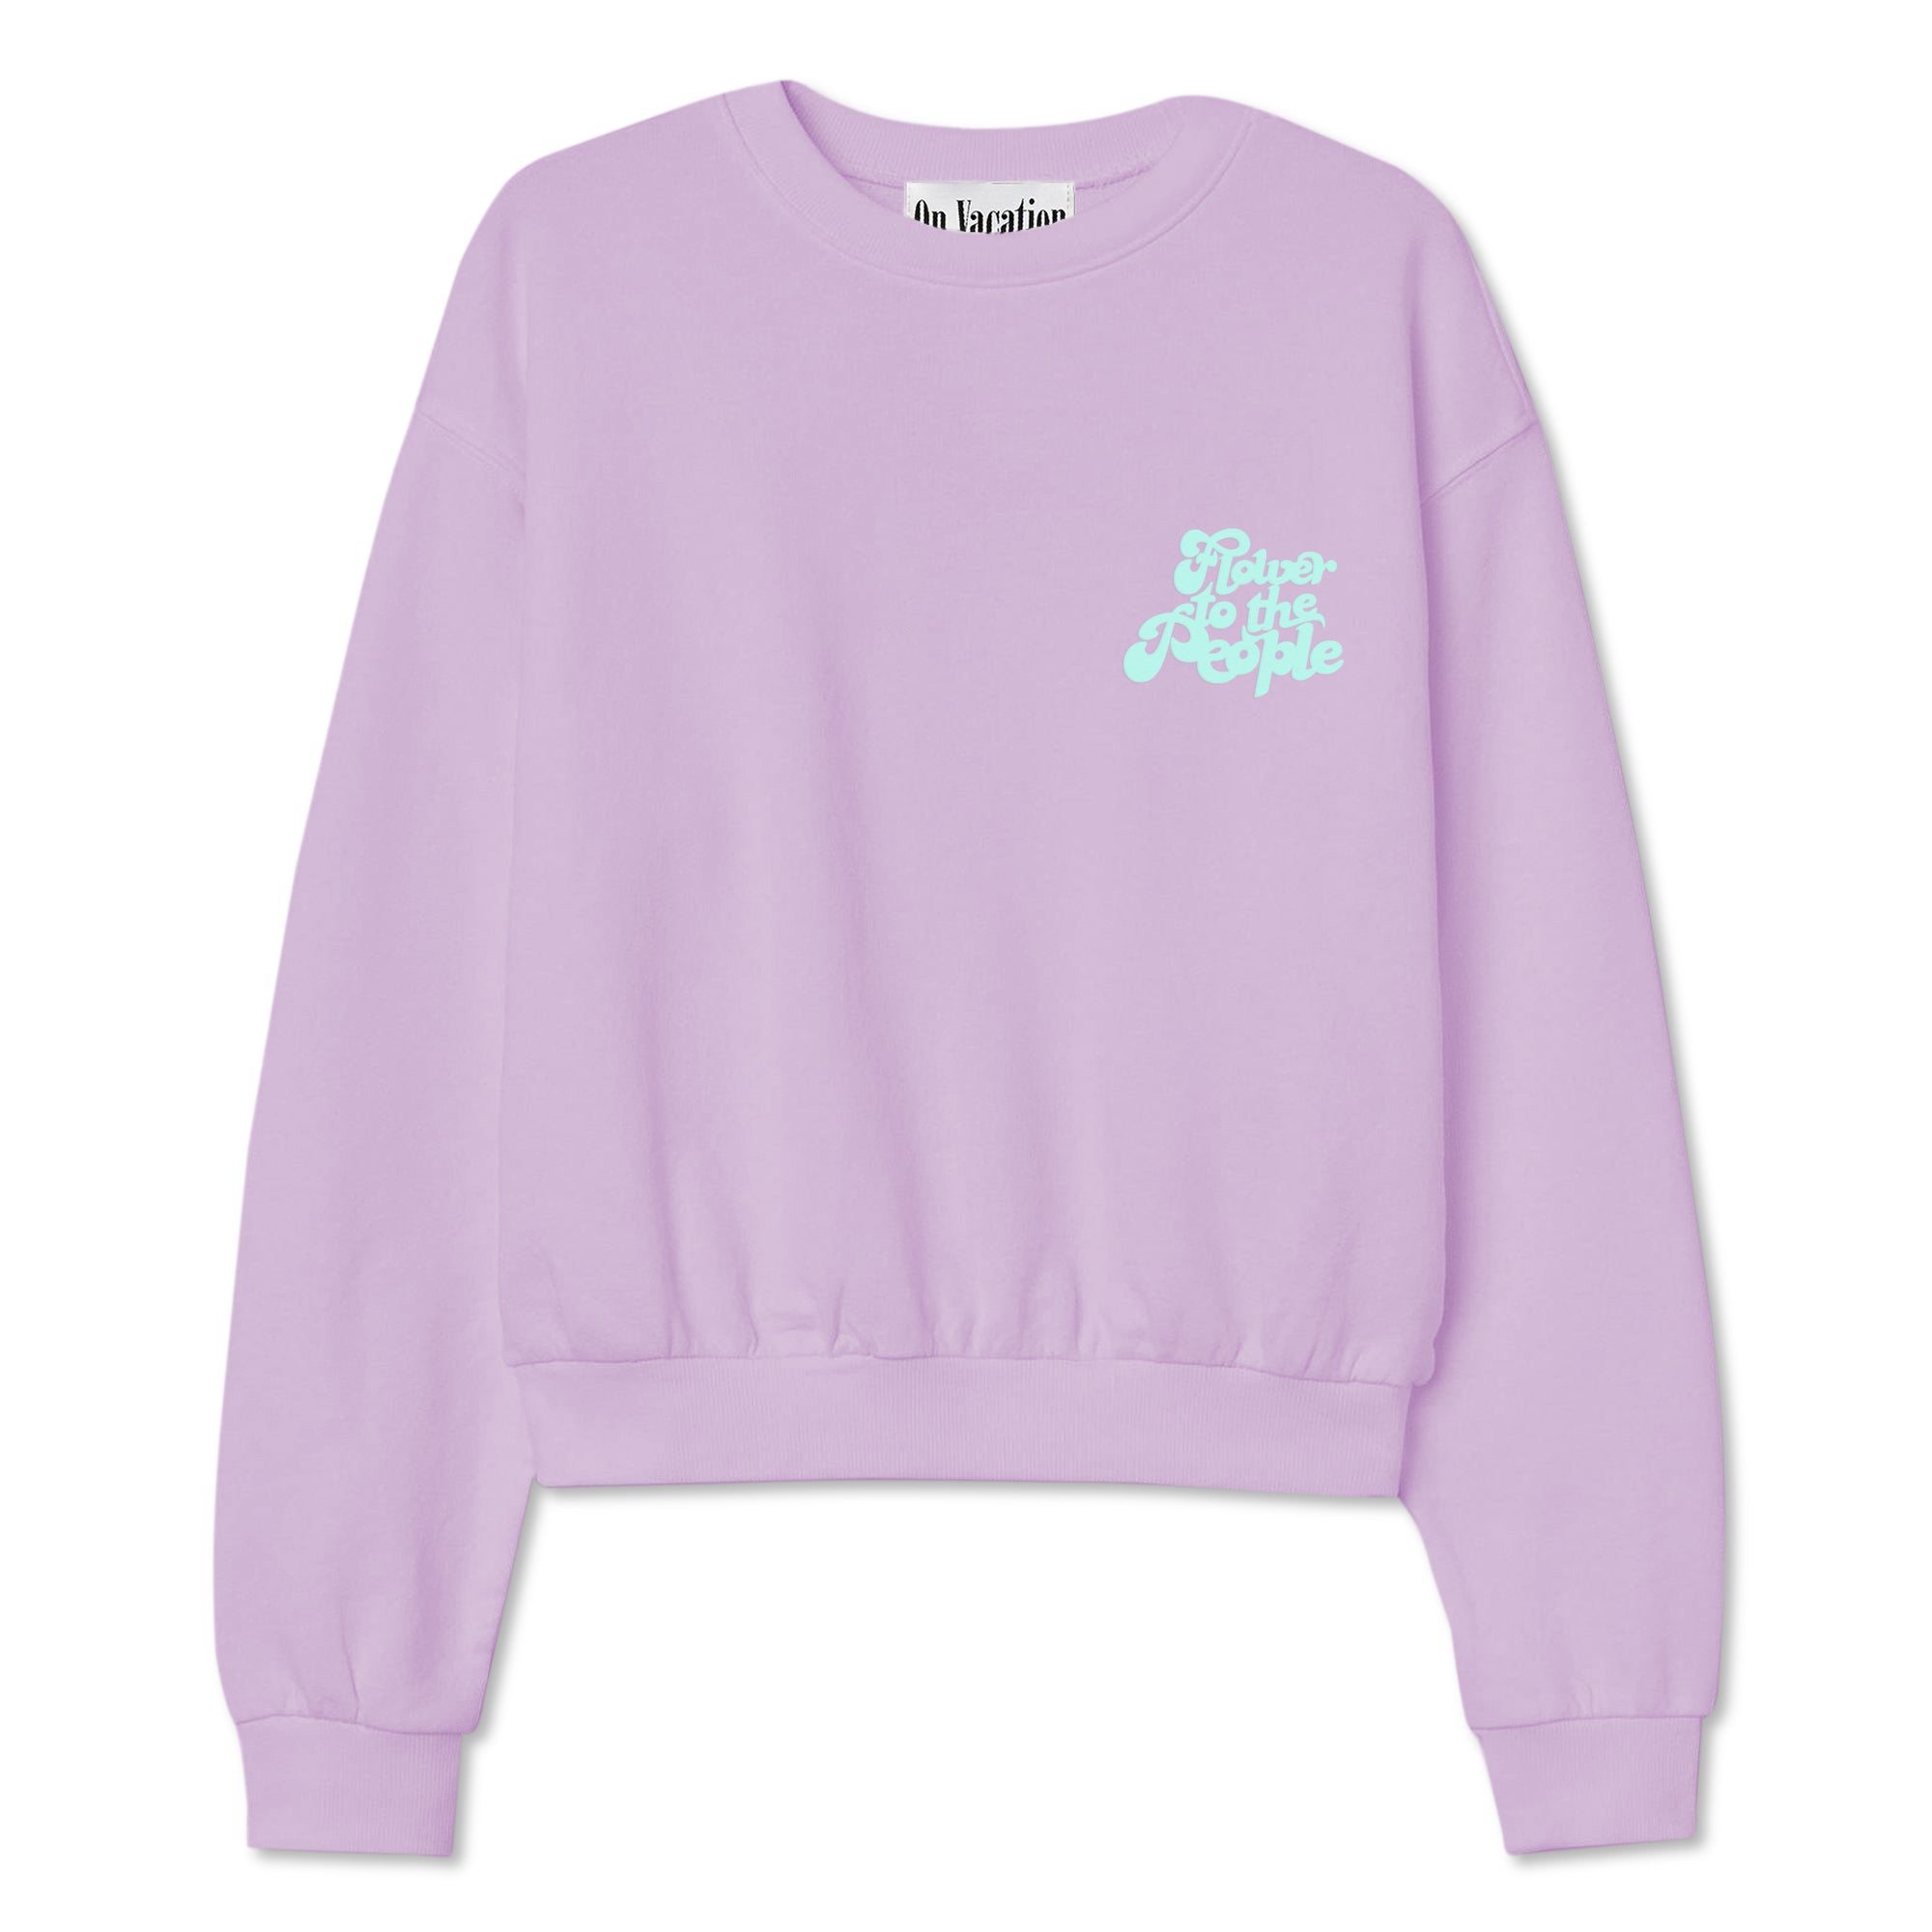 On Vacation Ladies Cropped Sweater "Flower" - Light Purple